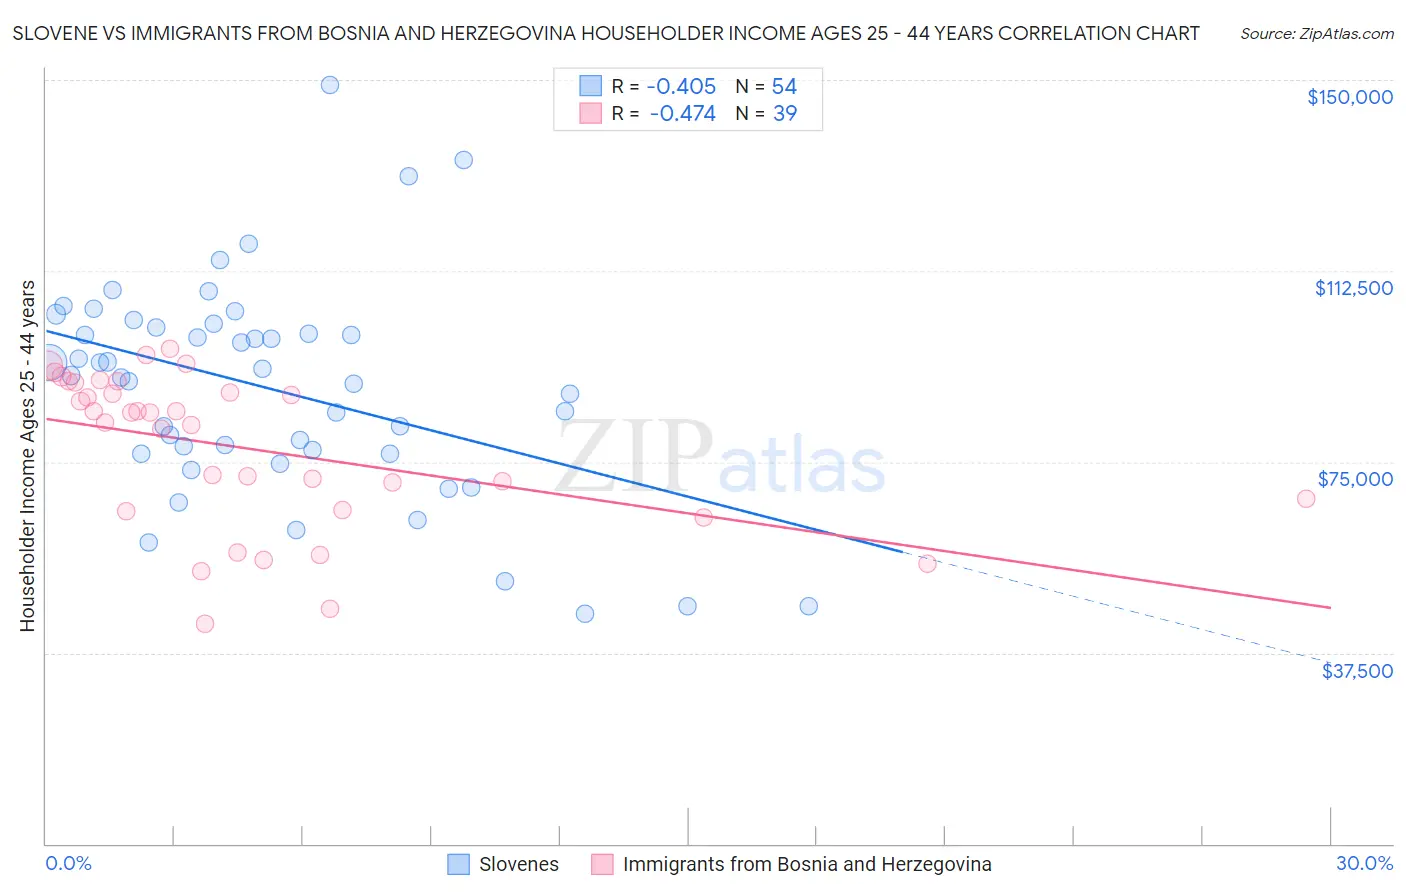 Slovene vs Immigrants from Bosnia and Herzegovina Householder Income Ages 25 - 44 years